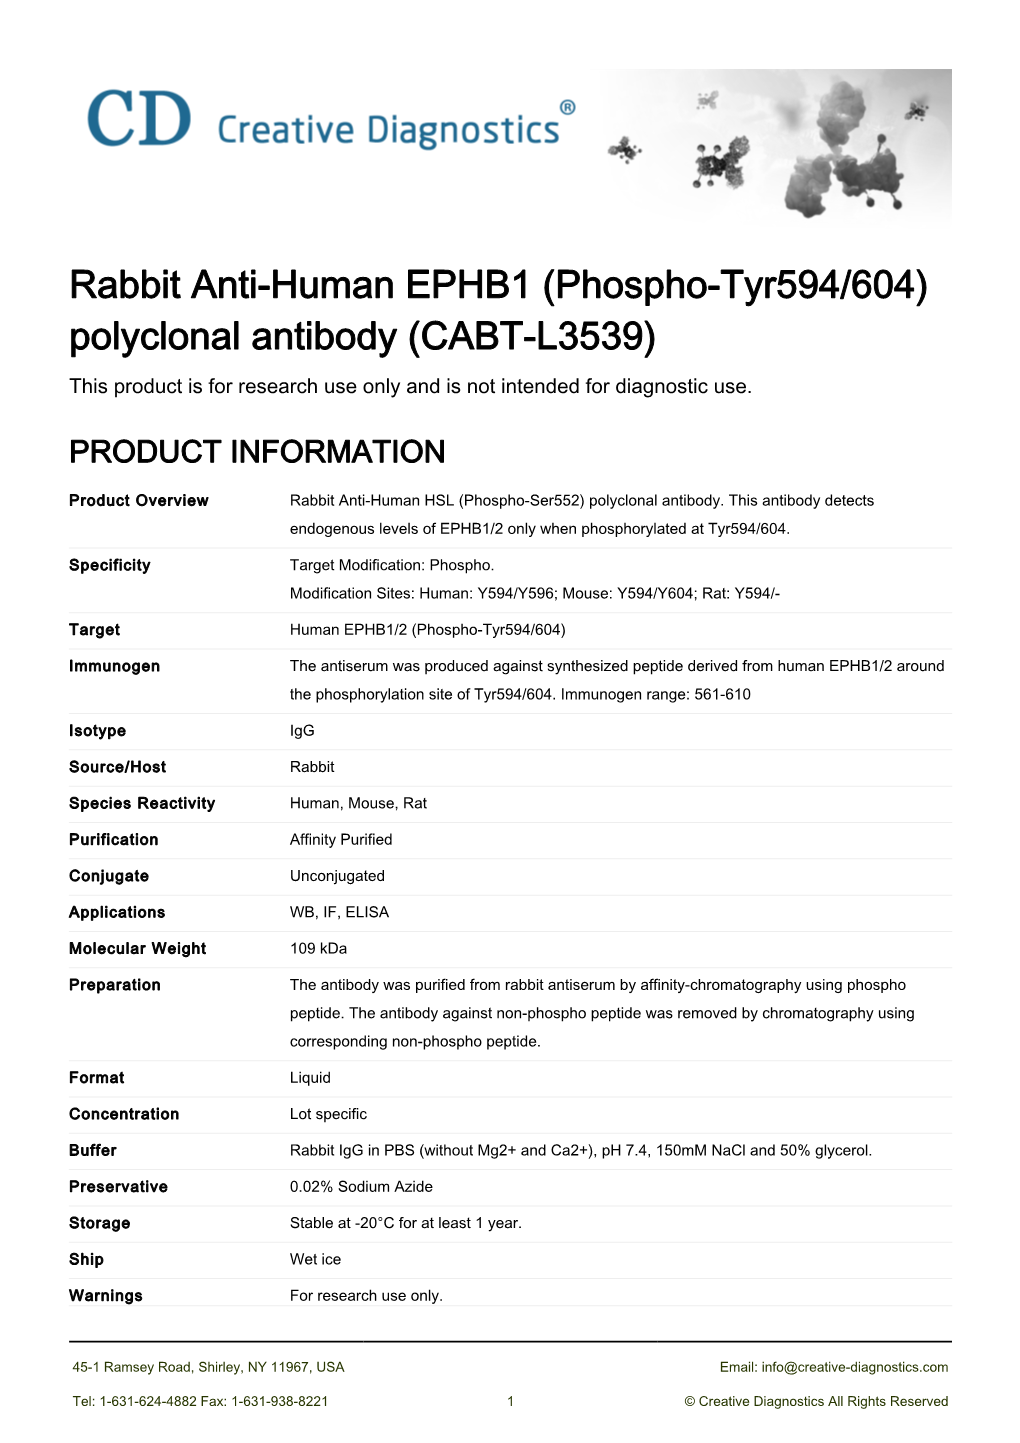 Rabbit Anti-Human EPHB1 (Phospho-Tyr594/604) Polyclonal Antibody (CABT-L3539) This Product Is for Research Use Only and Is Not Intended for Diagnostic Use